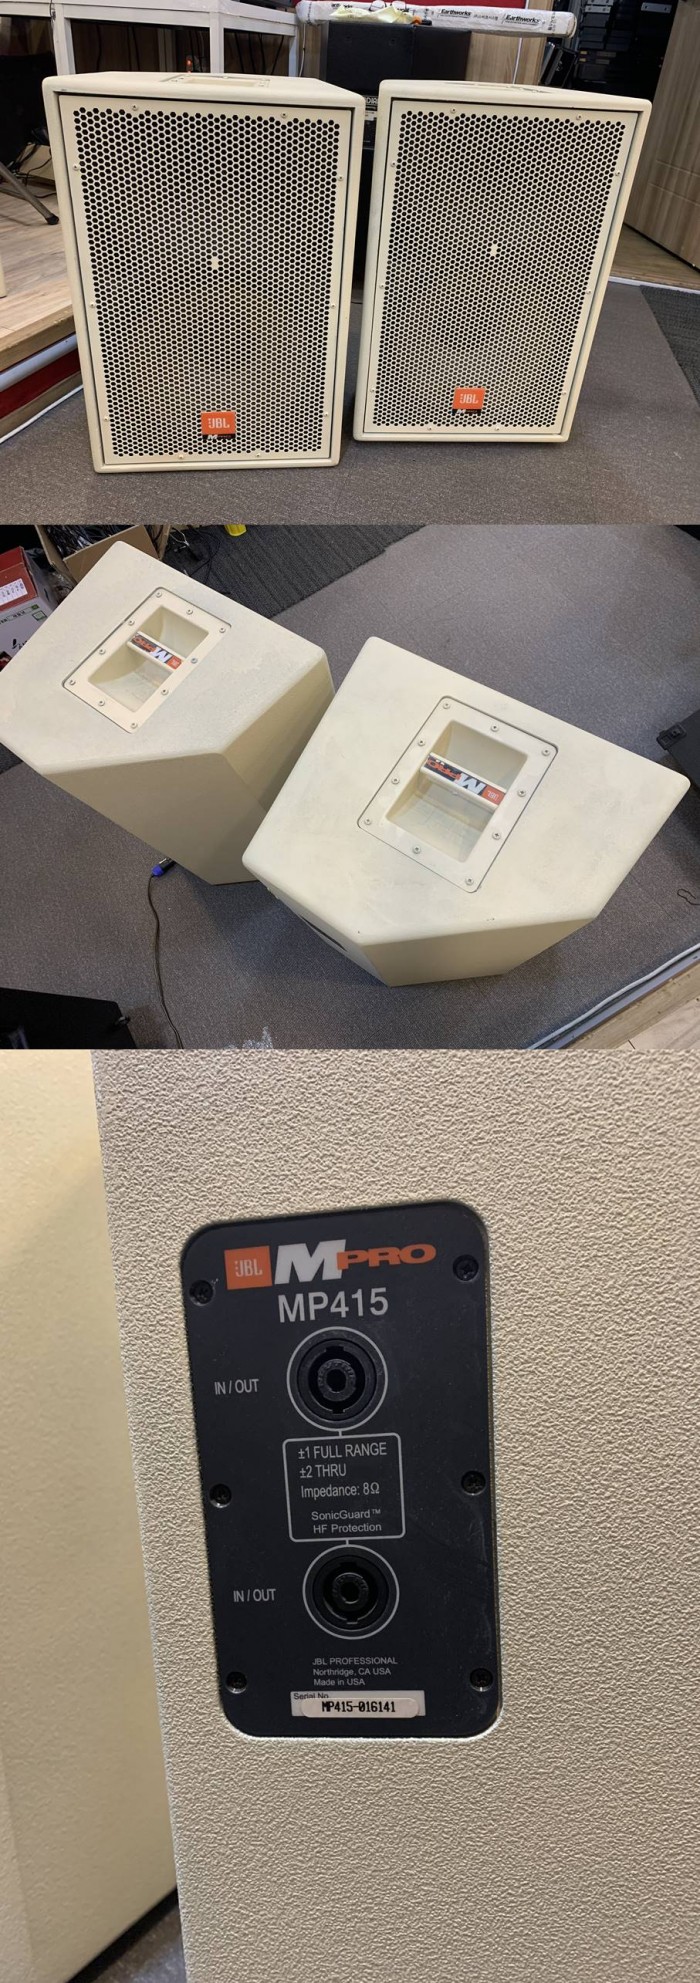 JBL MPRO MP415 (made in usa) 15 인치  75 만원